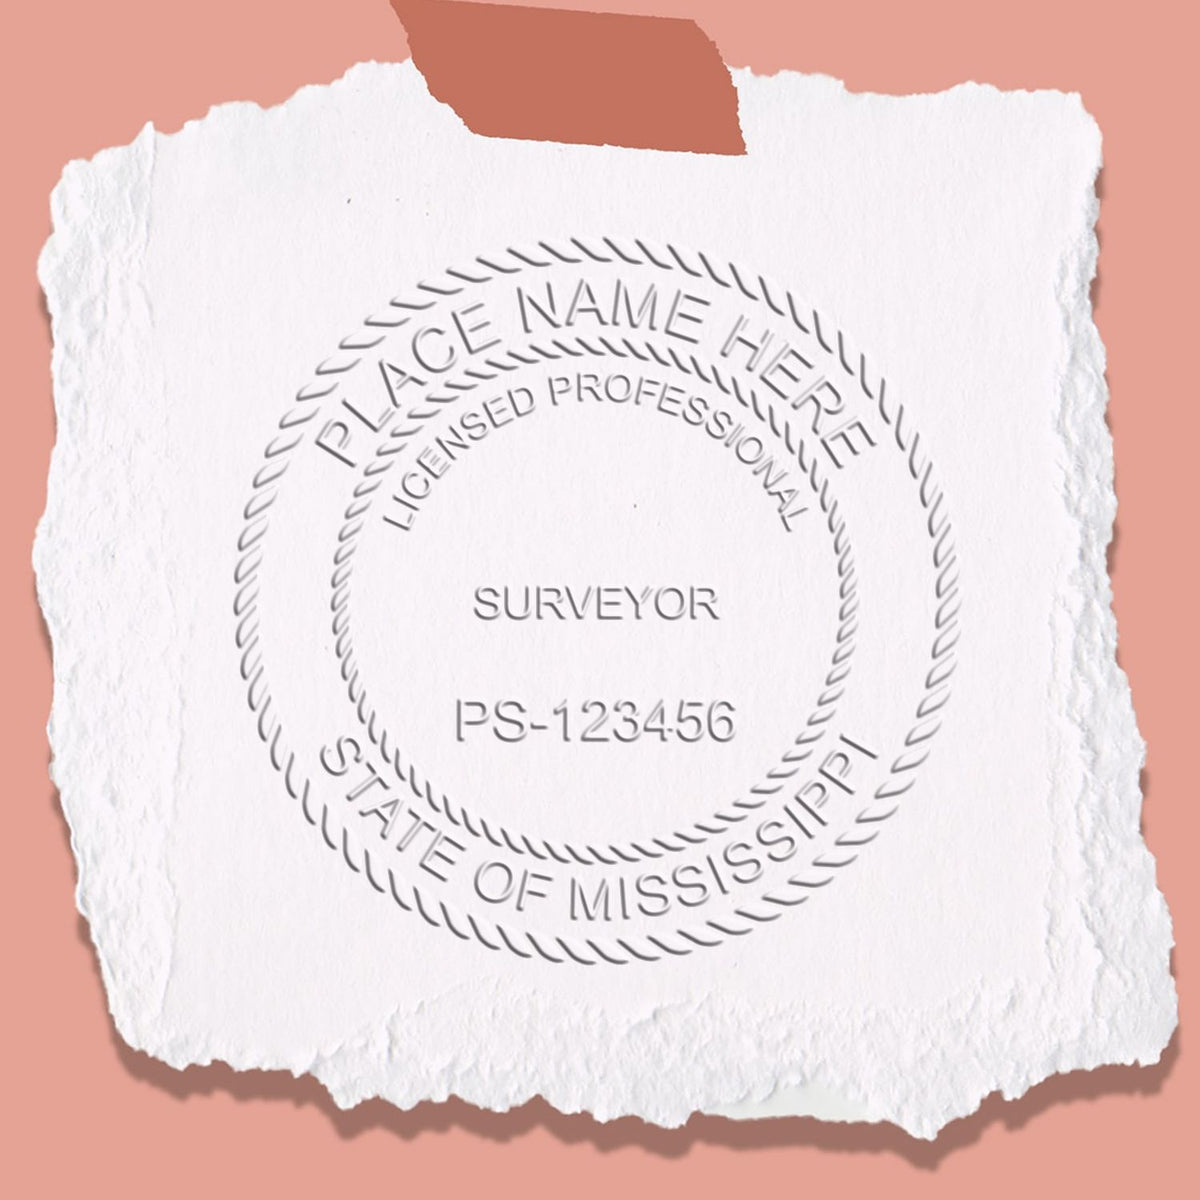 The Gift Mississippi Land Surveyor Seal stamp impression comes to life with a crisp, detailed image stamped on paper - showcasing true professional quality.